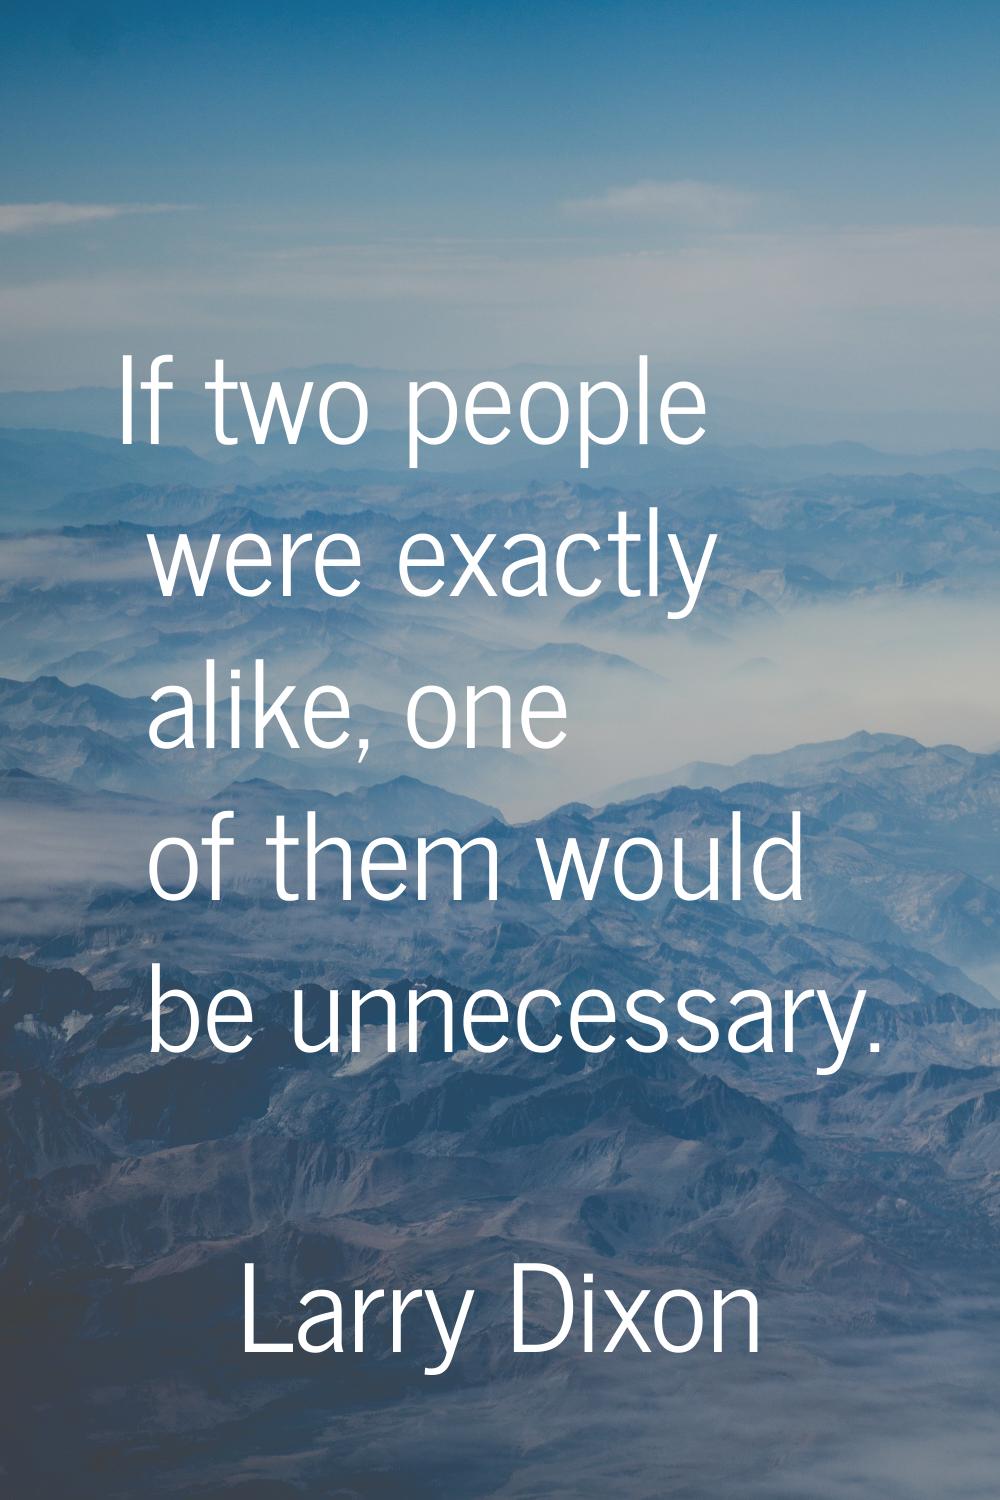 If two people were exactly alike, one of them would be unnecessary.